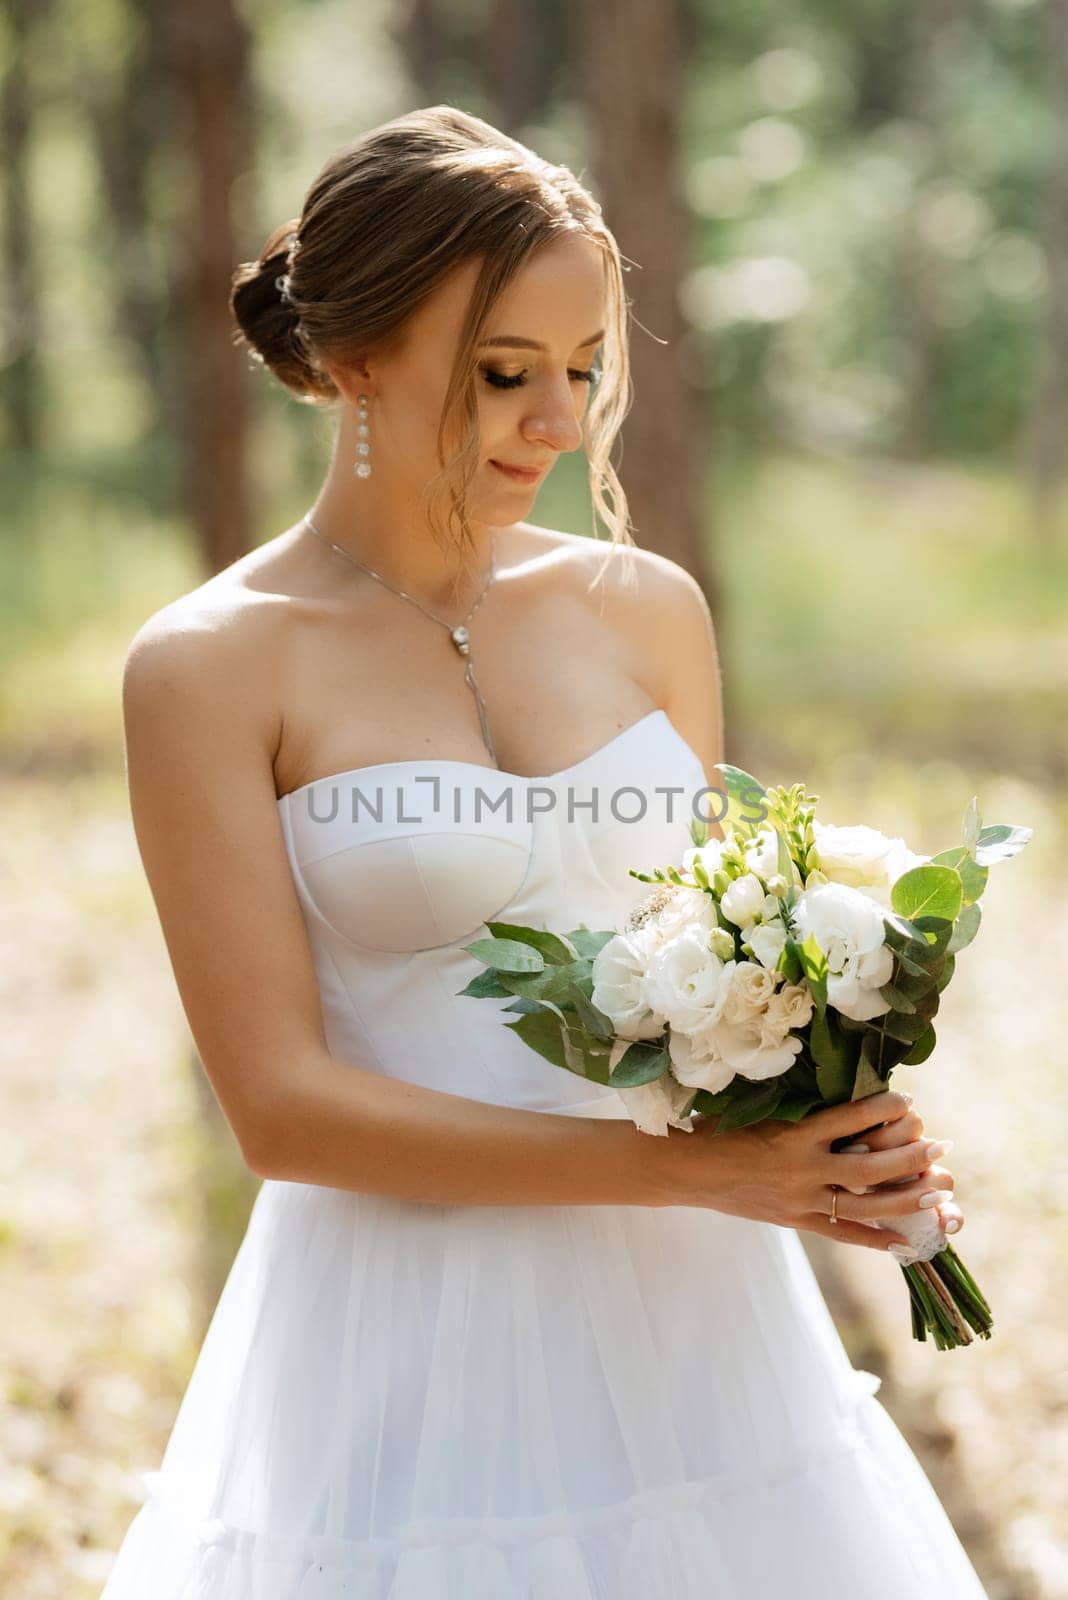 young bride in a white short dress in a spring pine forest by Andreua